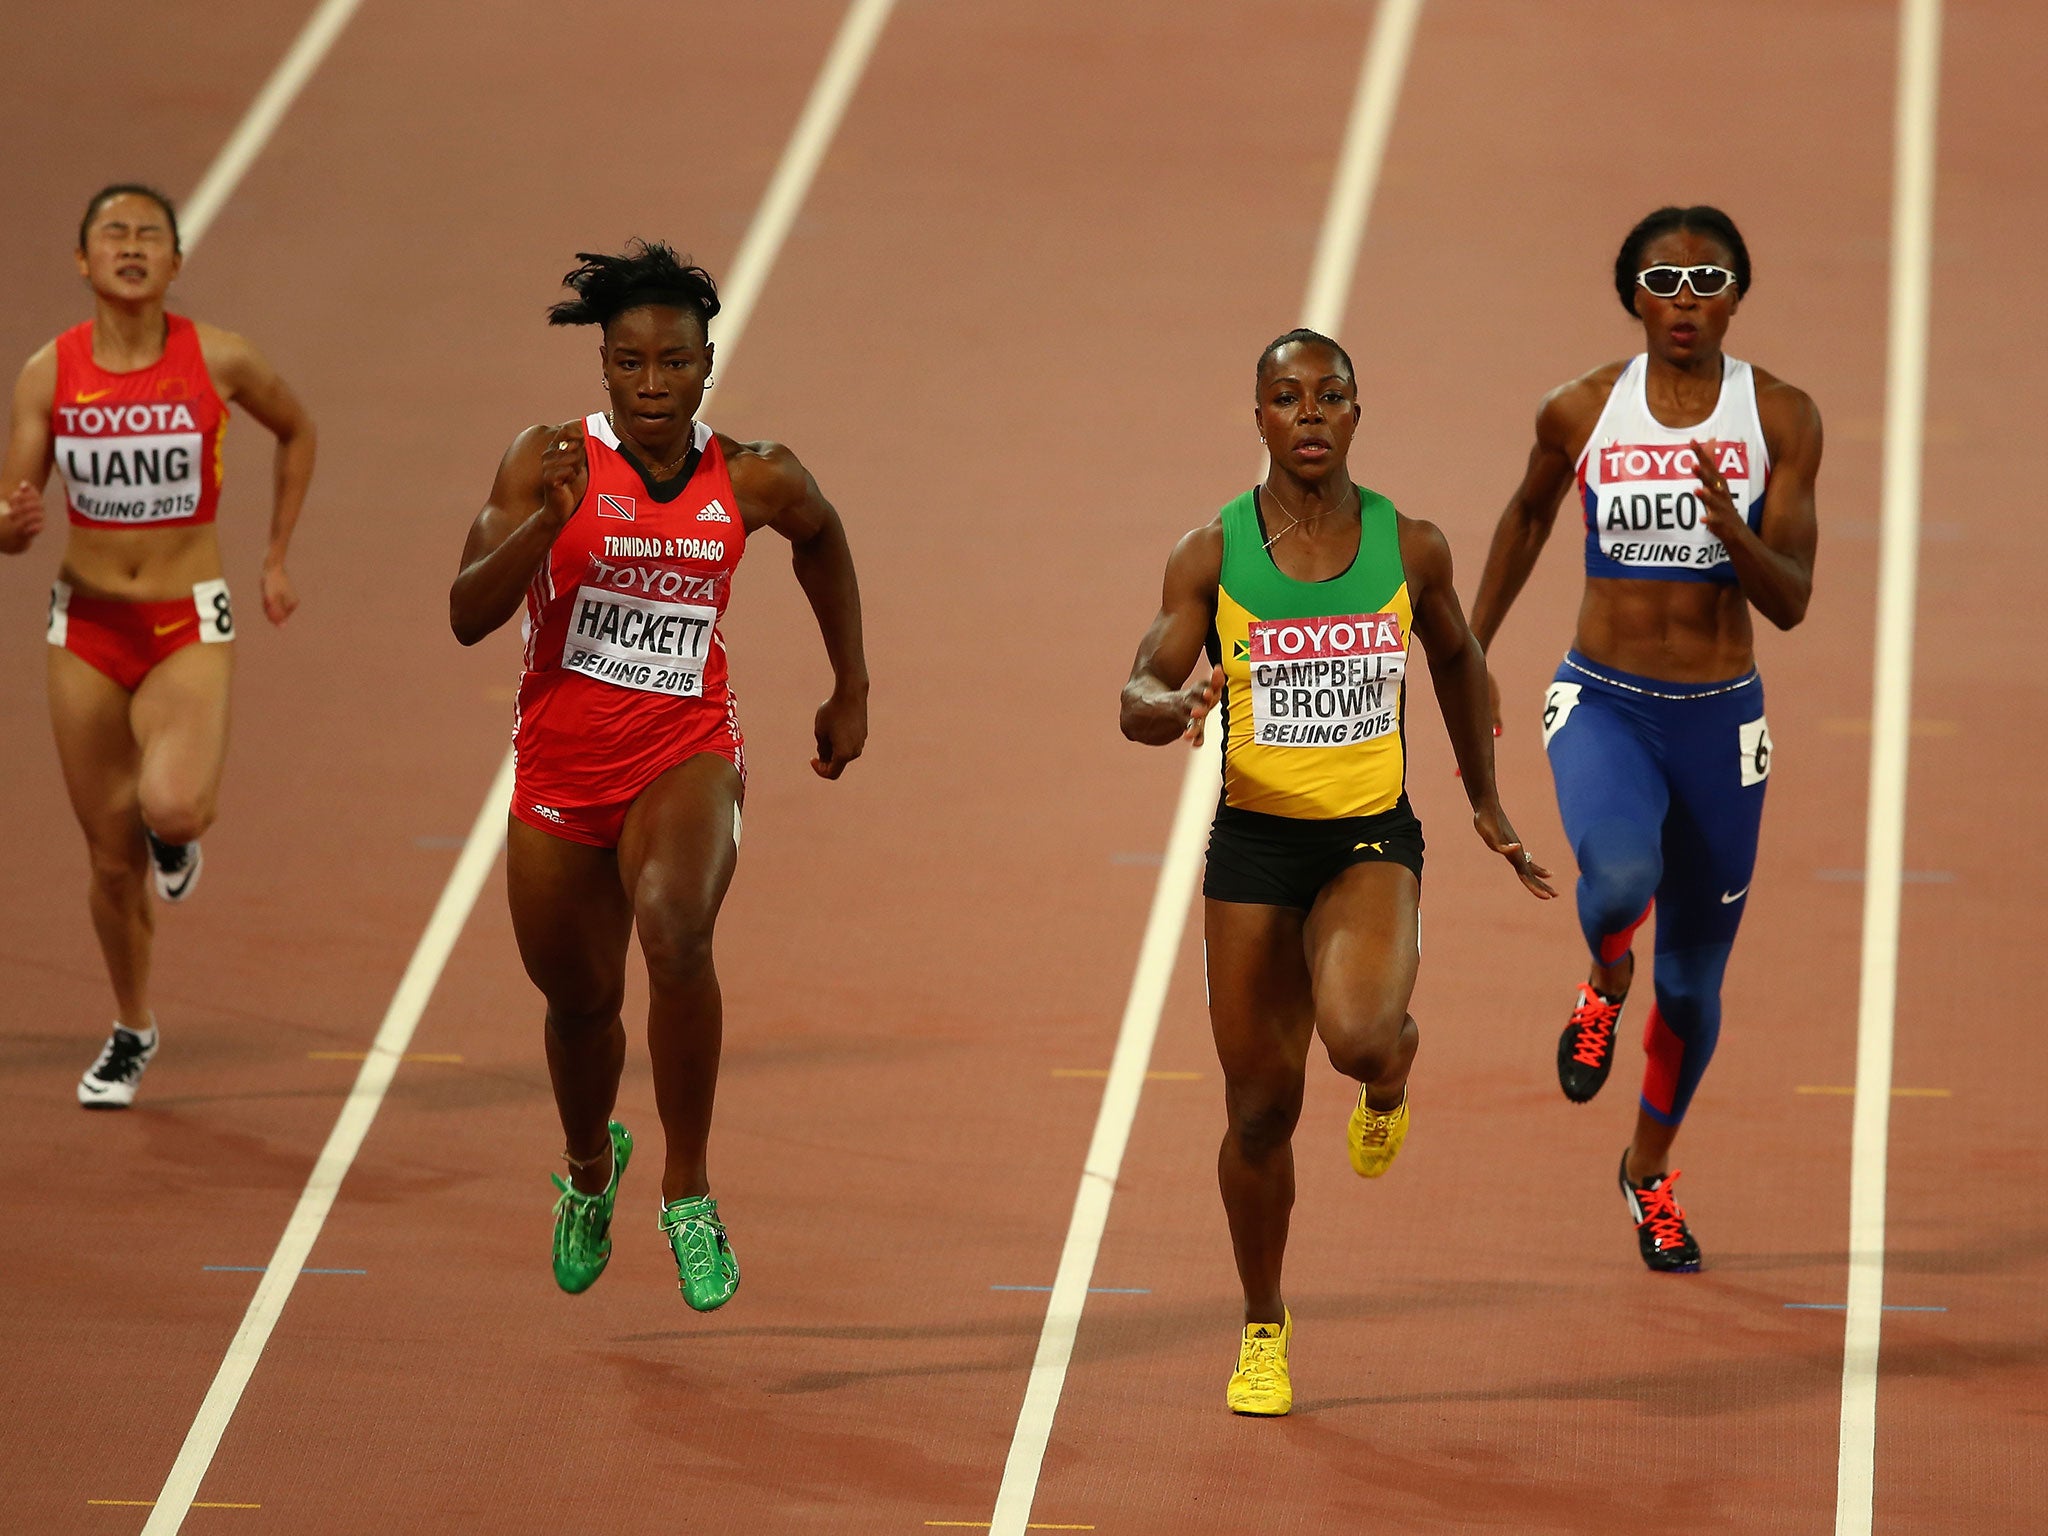 Veronica Campbell-Brown moves into the same lane as Margaret Adeoye